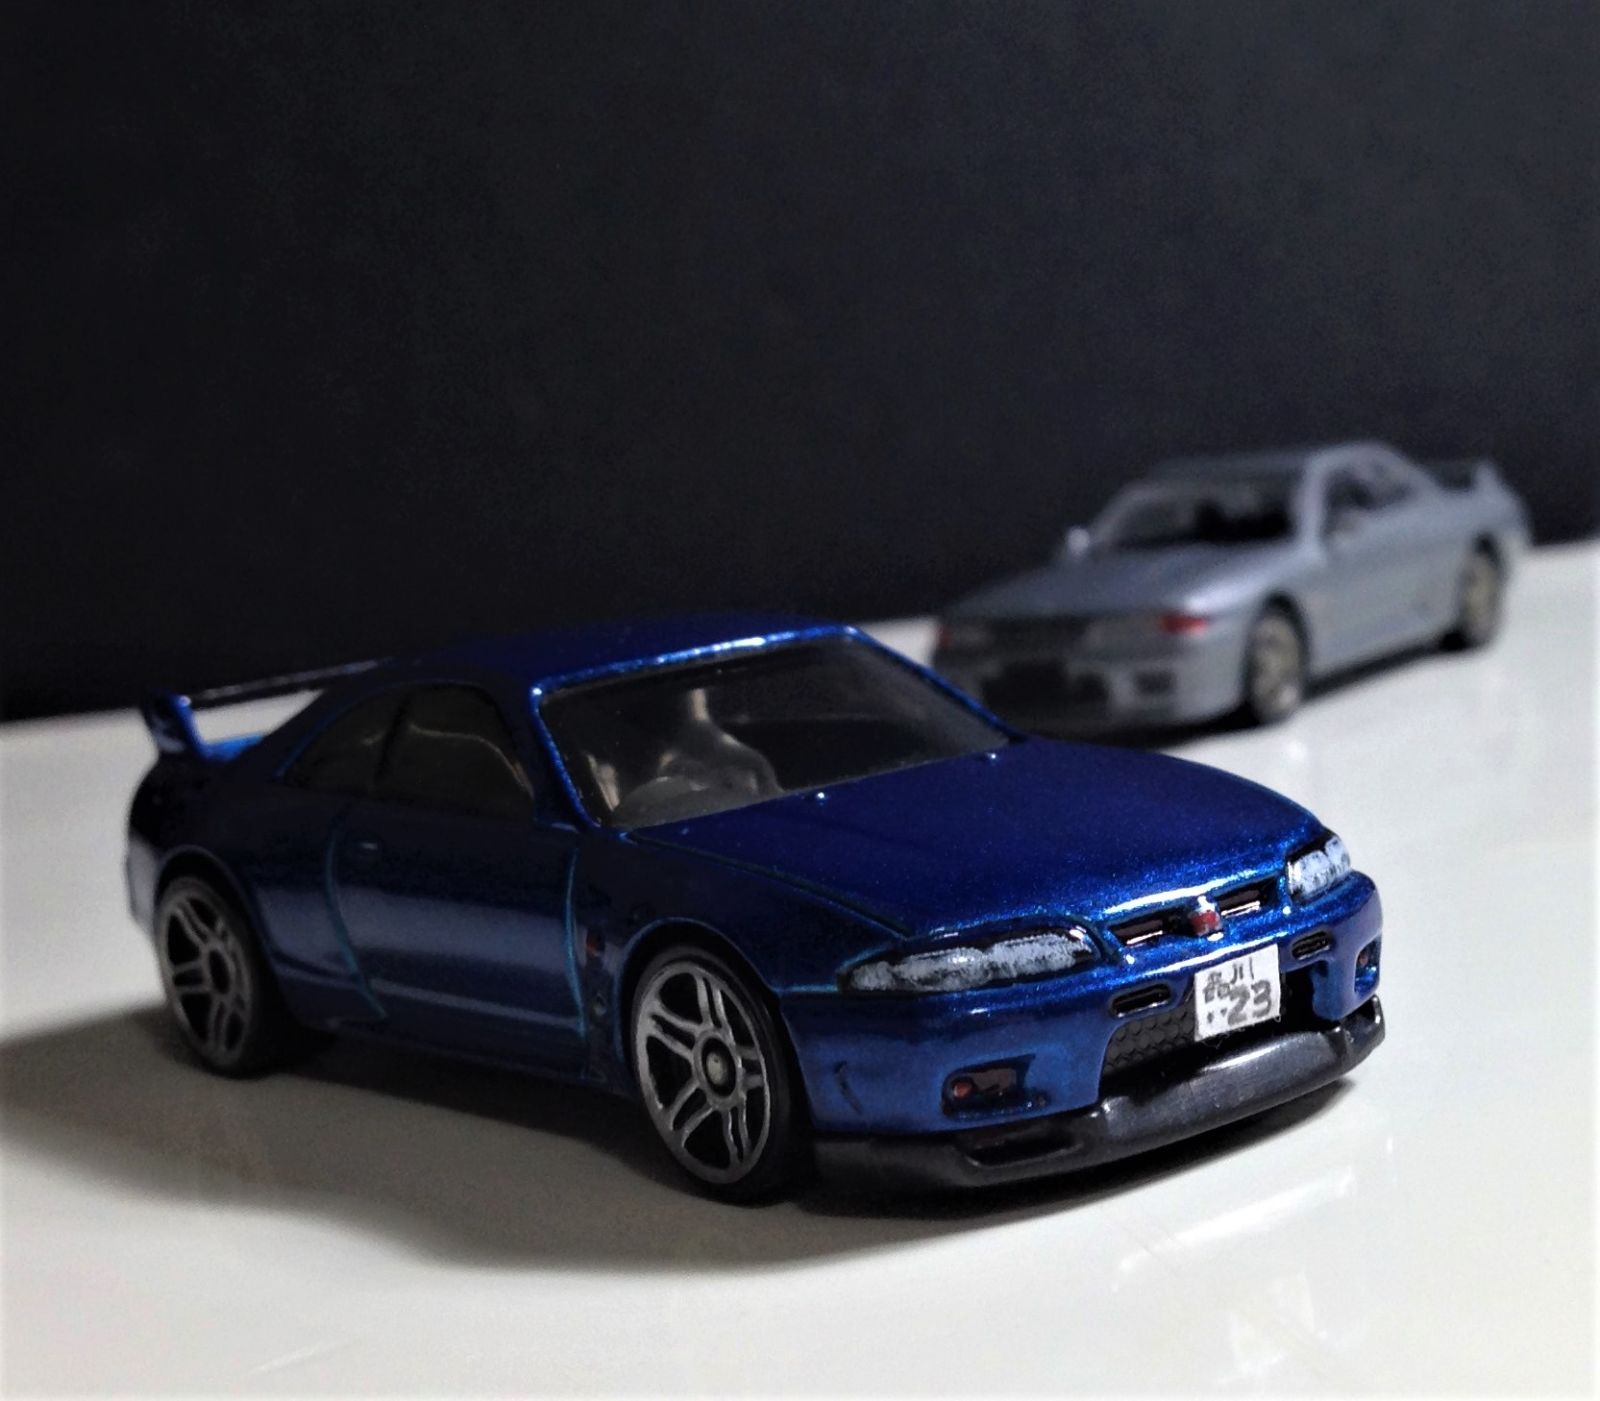 Featuring R32